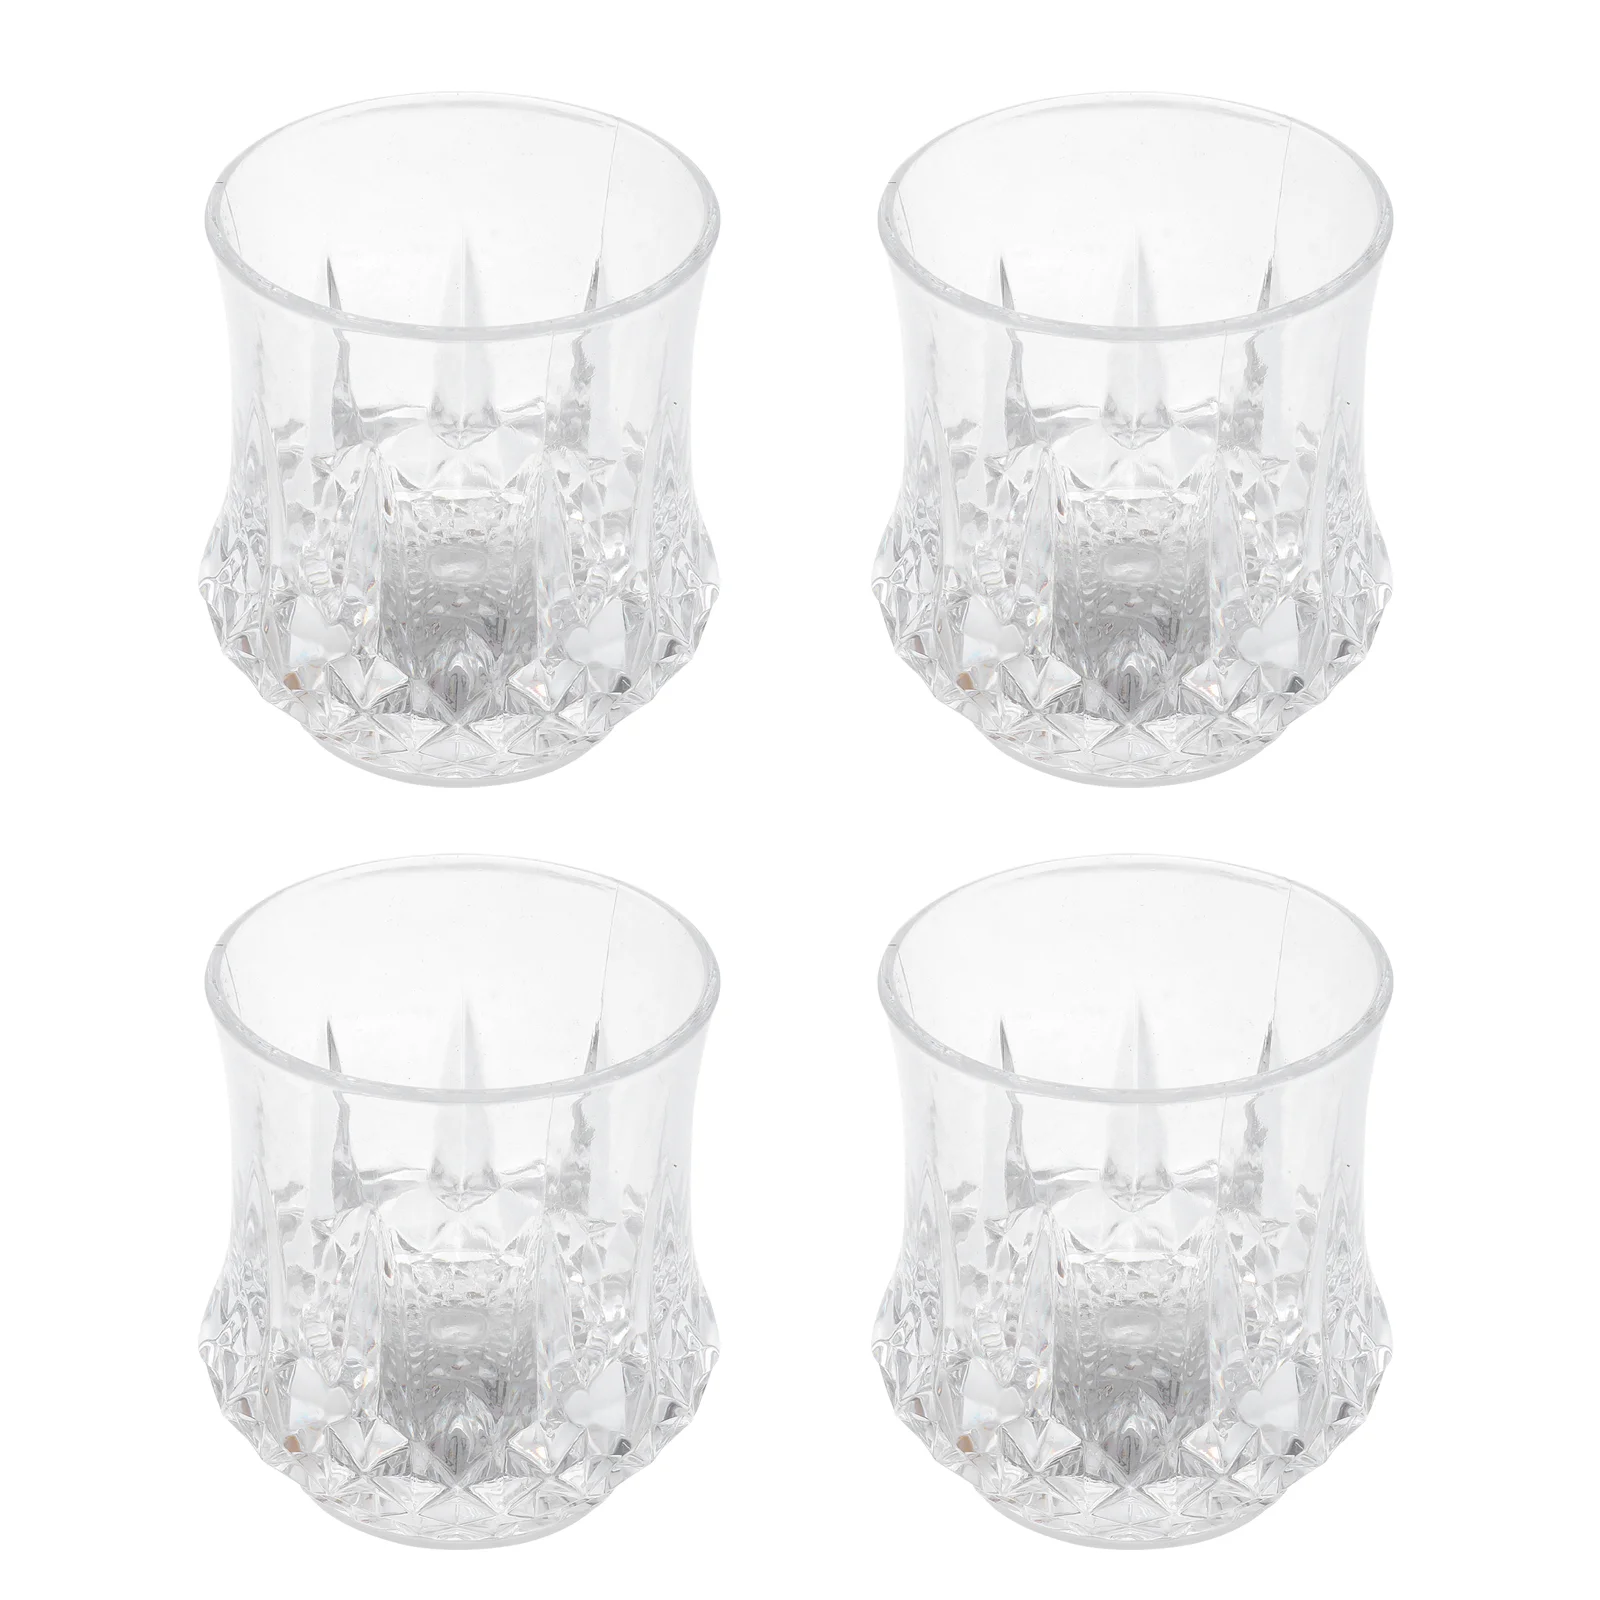 

4PCS LED Flash Drinking Crystal Cups Pineapple Design Tumblers for Party Decor Bar